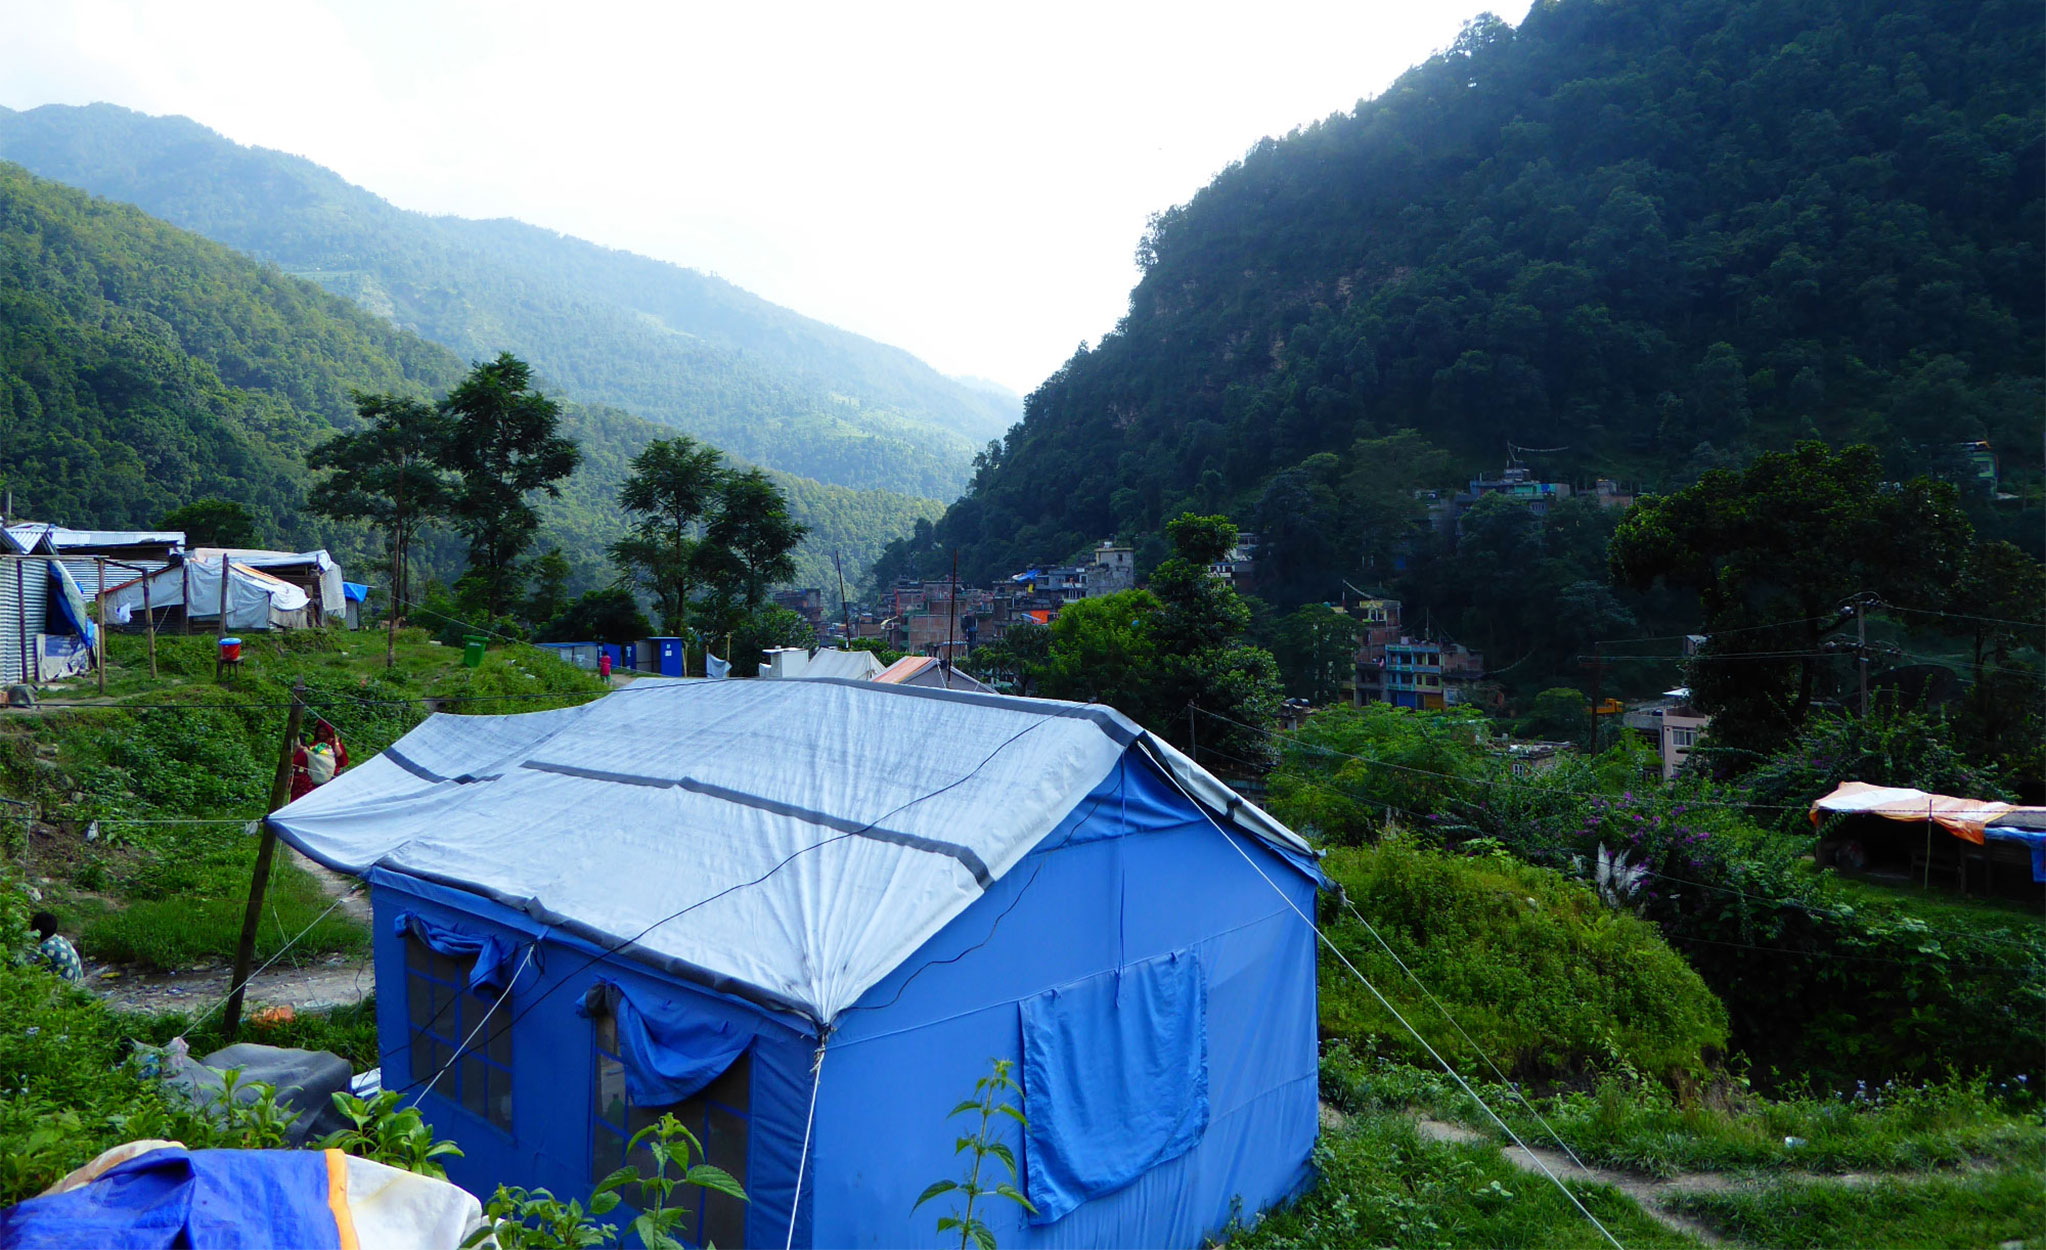 In Sindhupalchok, the district worst affected by the earthquake, thousands still live in temporary shelters. This is one such camp in Bahrabise, close to the Chinese border. Photo: Patrick Ward